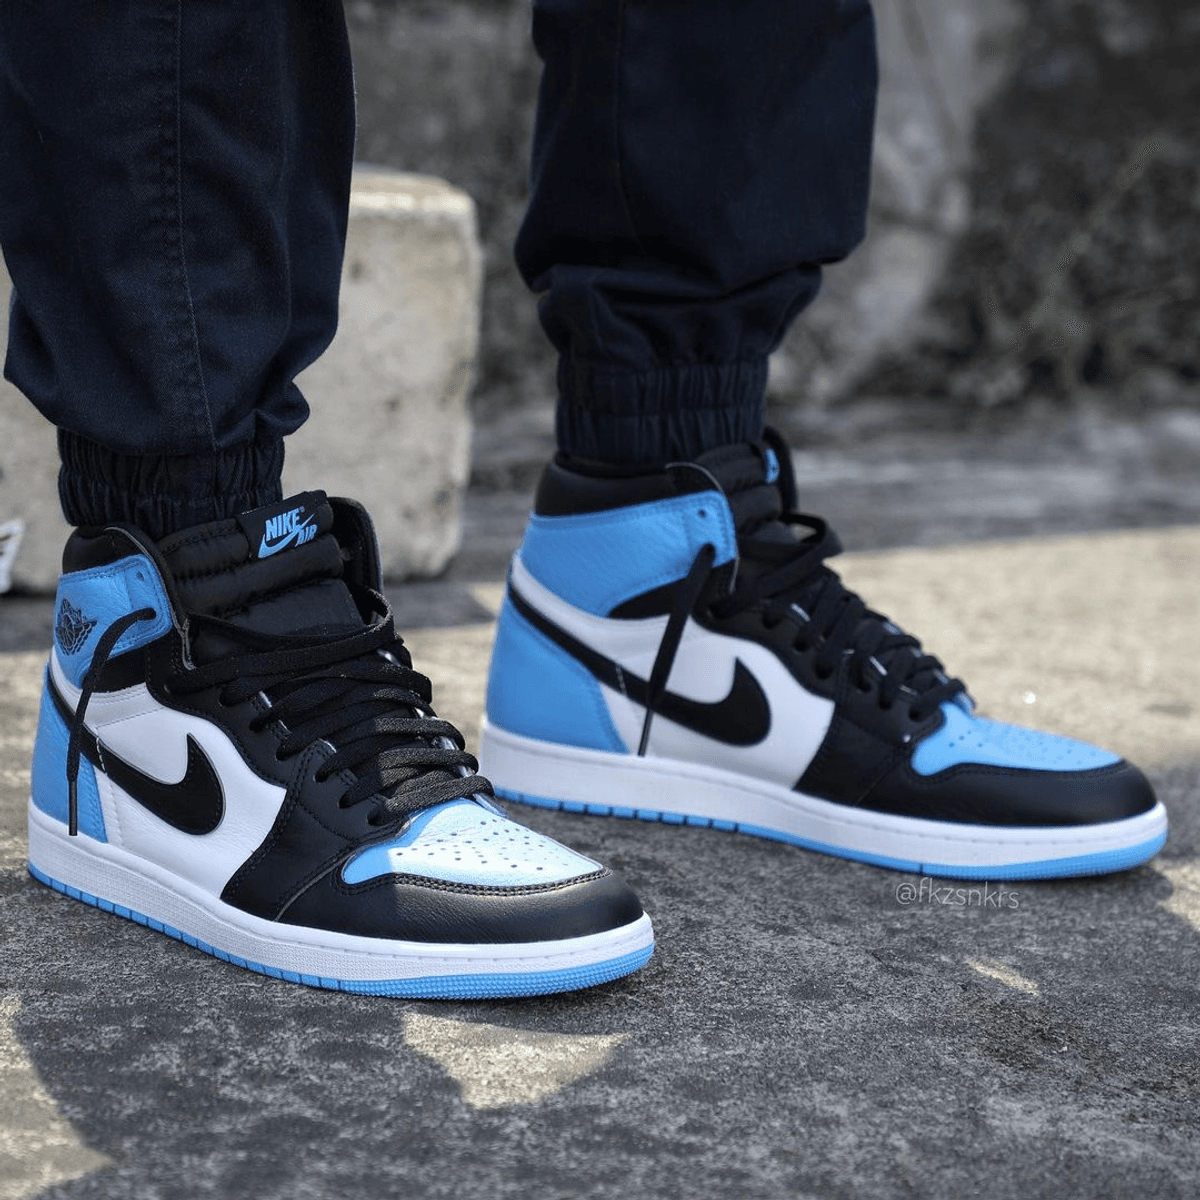 The Air Jordan 1 High OG UNC Toe Is Set To Release In 2023